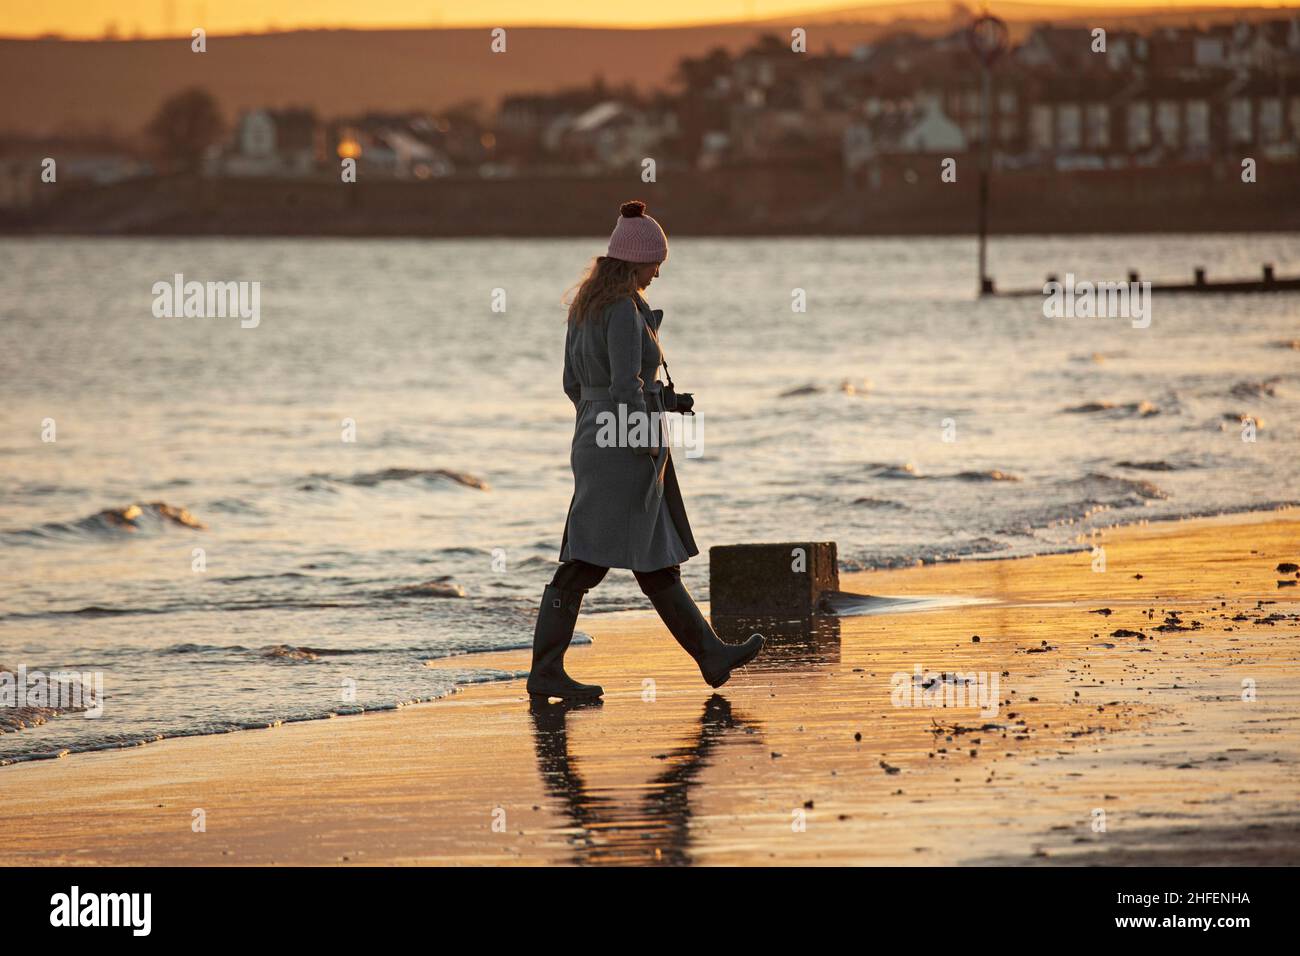 Portobello, Edinburgh, Scotland, UK. 16th January 2022. Finally sunrise sunshine with temperature of 7 degrees after a week of heavy cloud in the skies above the city. Credit: Scottishcreative/Alamy Live News. Stock Photo